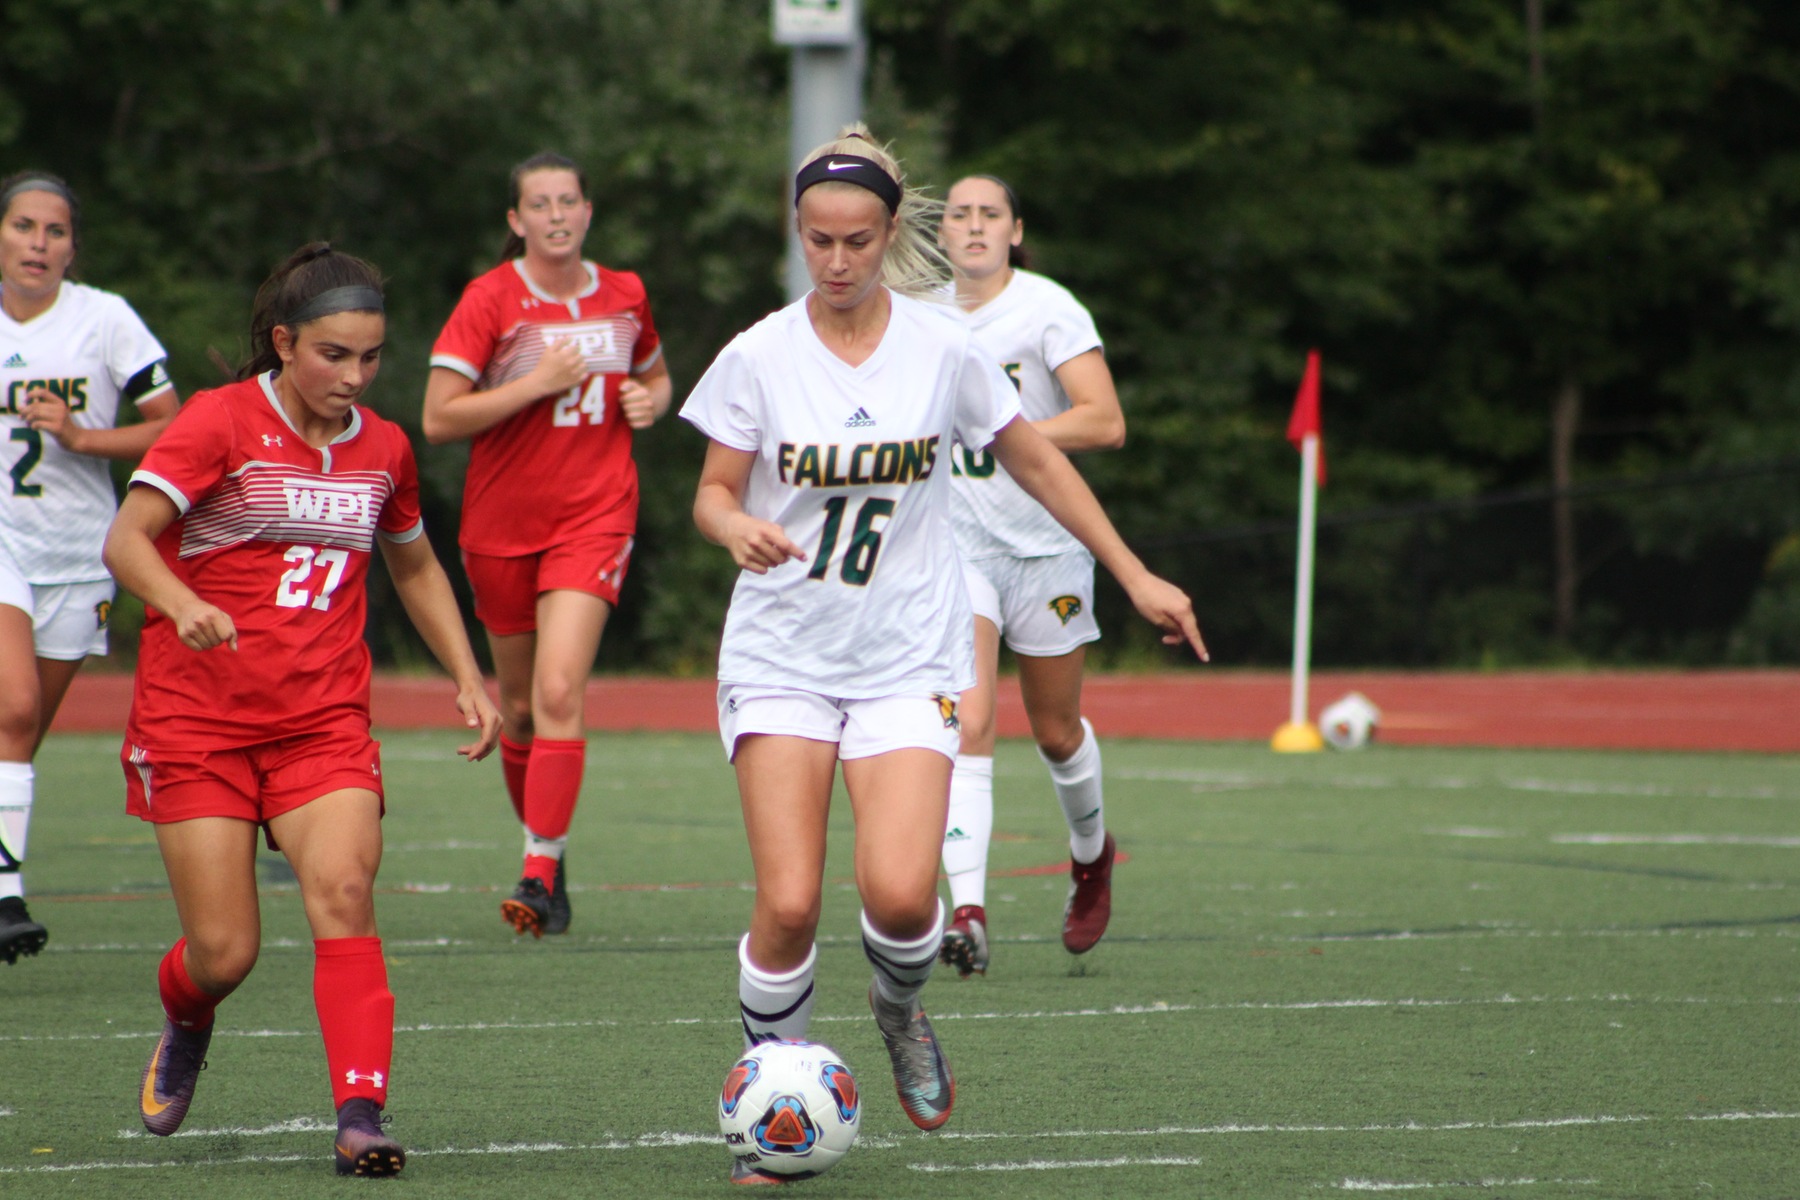 Falcons Upended By Engineers, 4-0